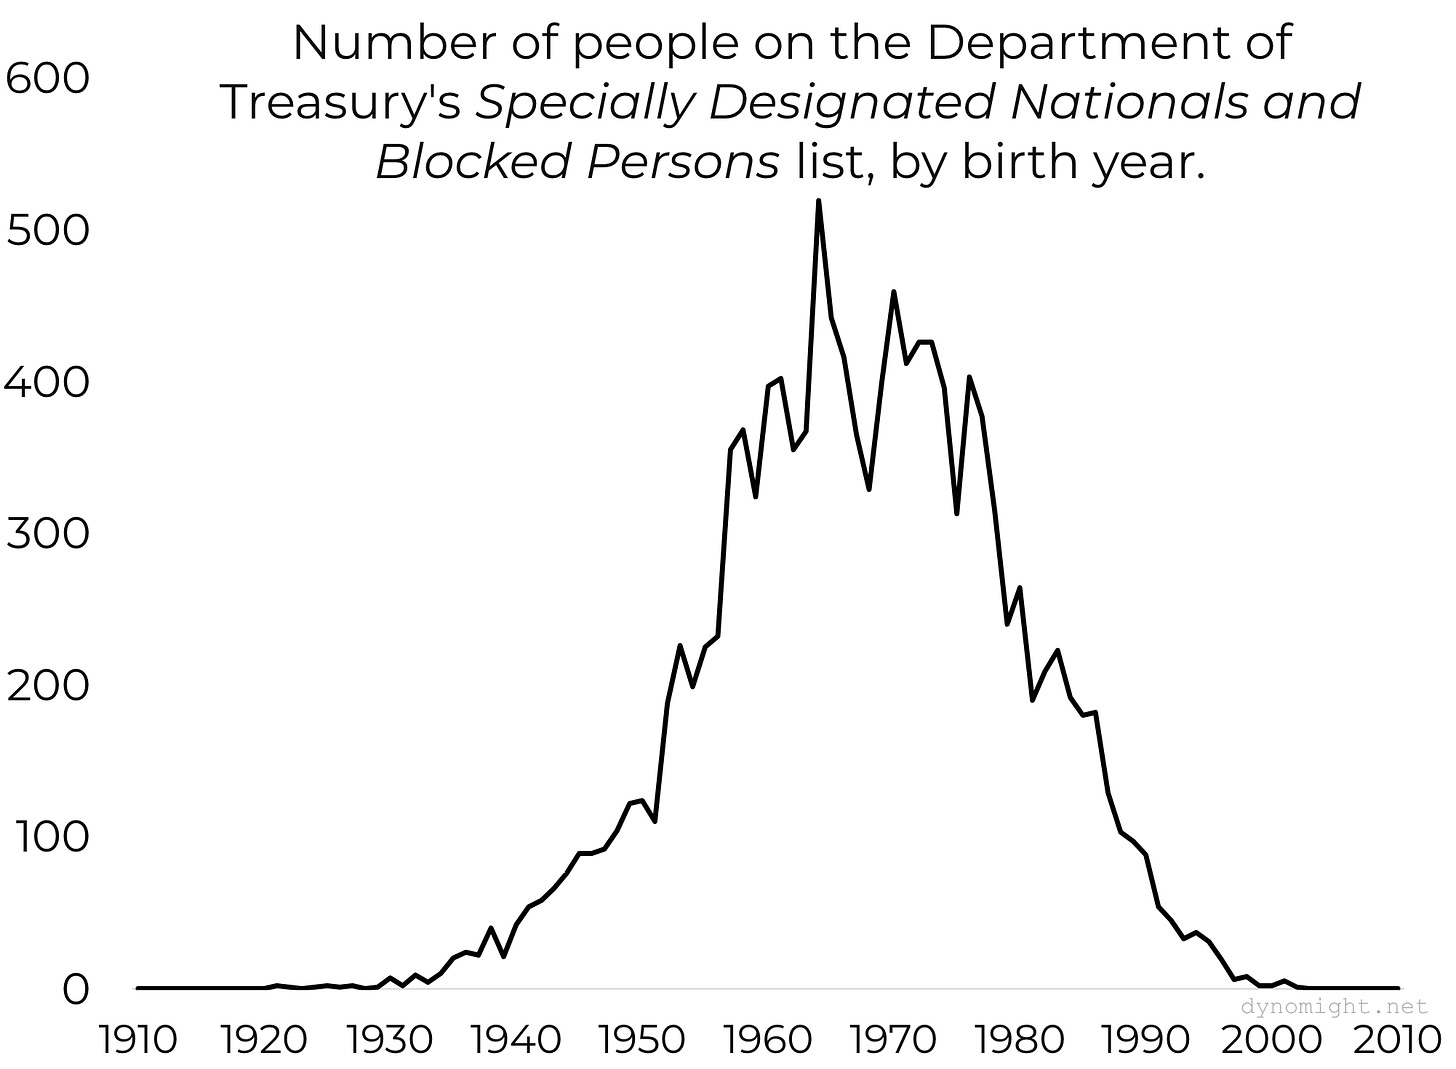 number of people on the blocked list by birth year